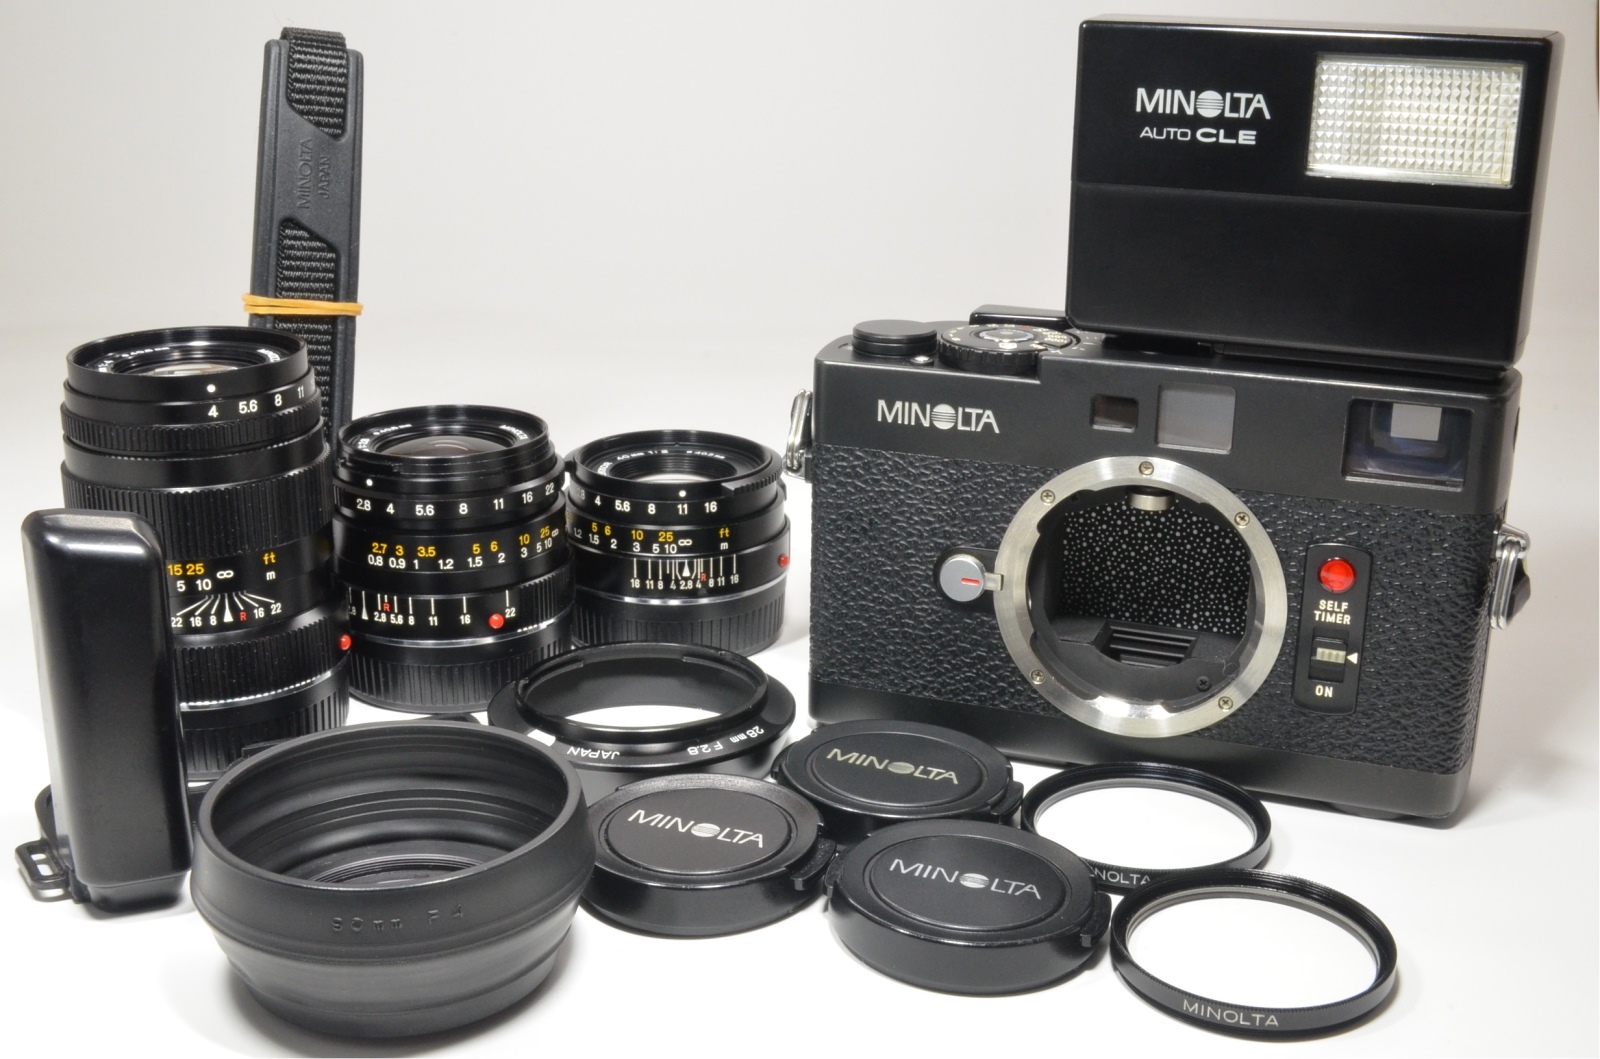 minolta cle film camera with m-rokkor 40mm, 28mm, 90mm and flash